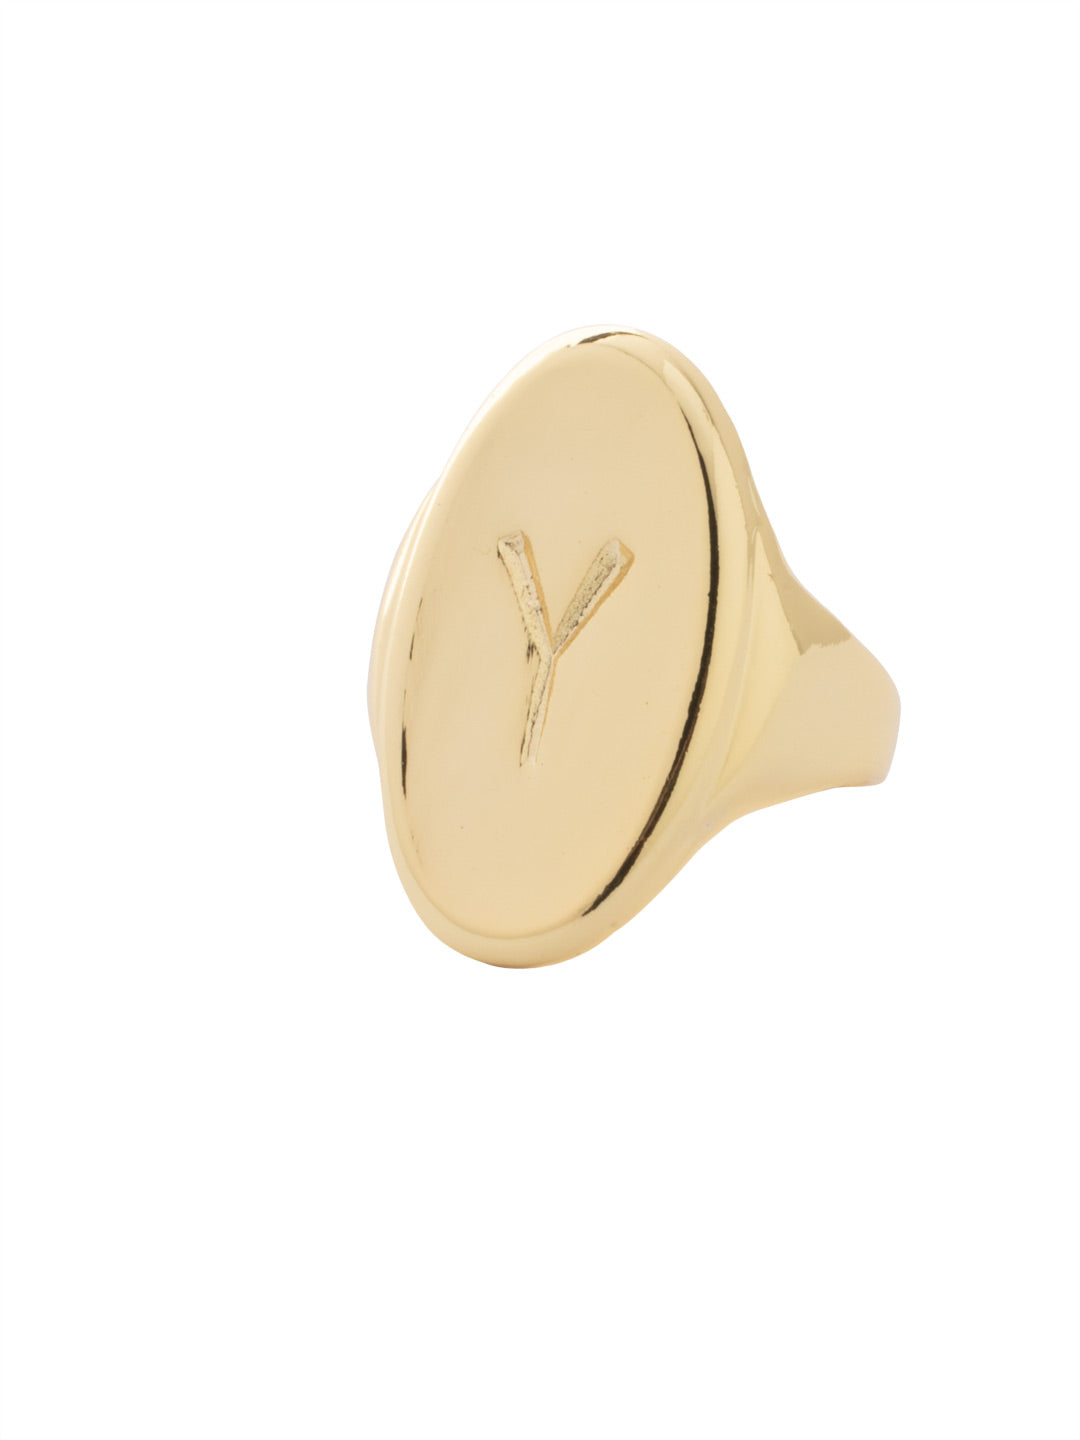 "Y" Signet Statement Ring - RFK54BGMTL - <p>The Signet Statement Ring features a capital letter stamped into an oblong metal disk on an adjustable ring band. From Sorrelli's Bare Metallic collection in our Bright Gold-tone finish.</p>